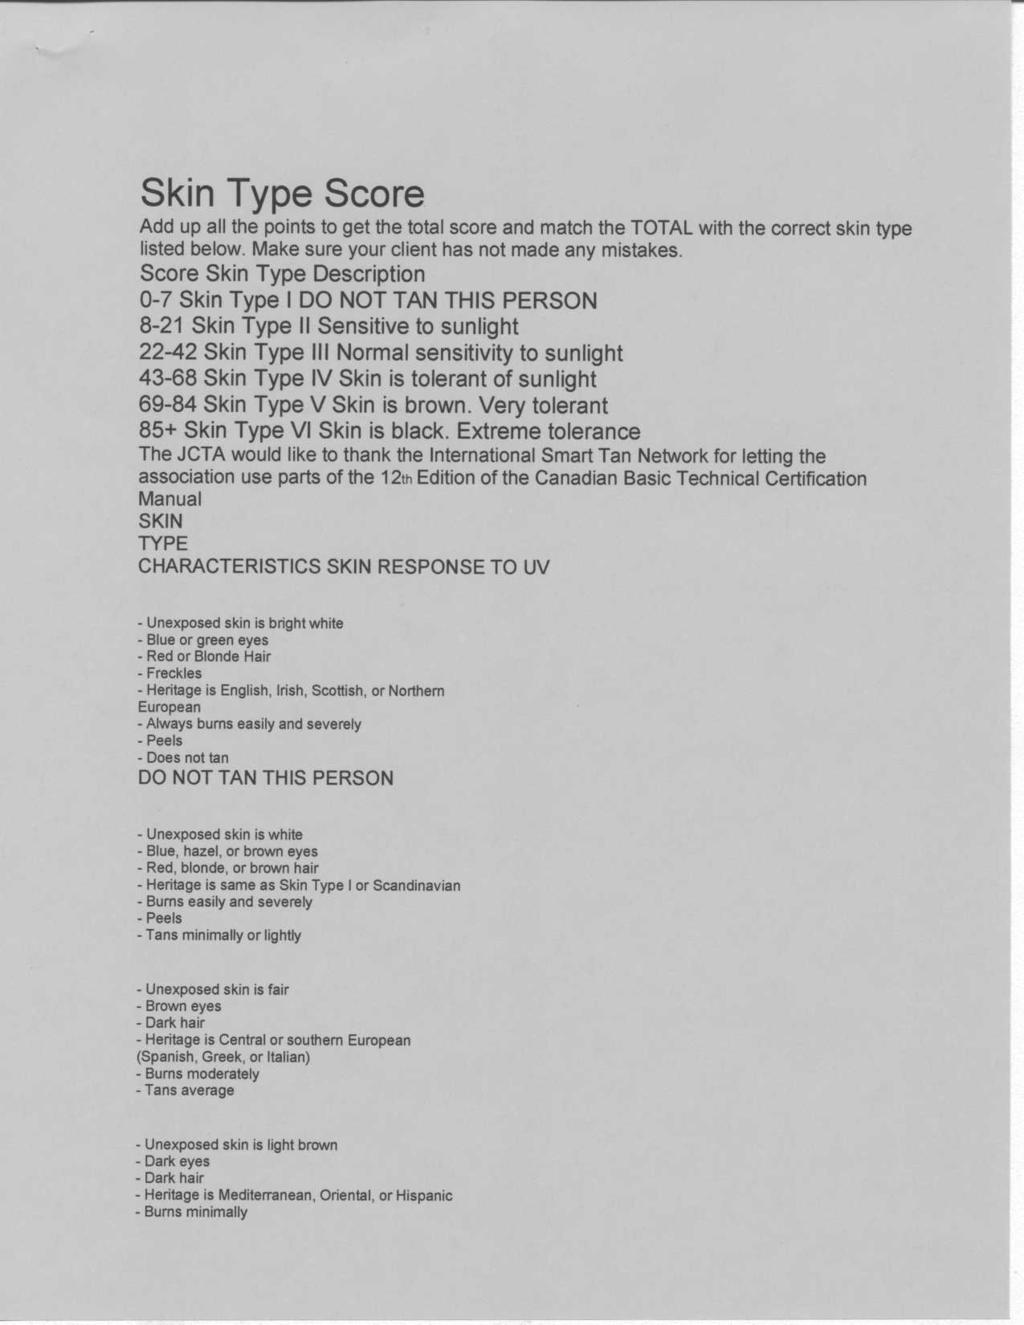 Skin Type Score Add up all the points to get the total score and match the TOTAL with the correct skin typ e listed below. Make sure your client has not made any mistakes.